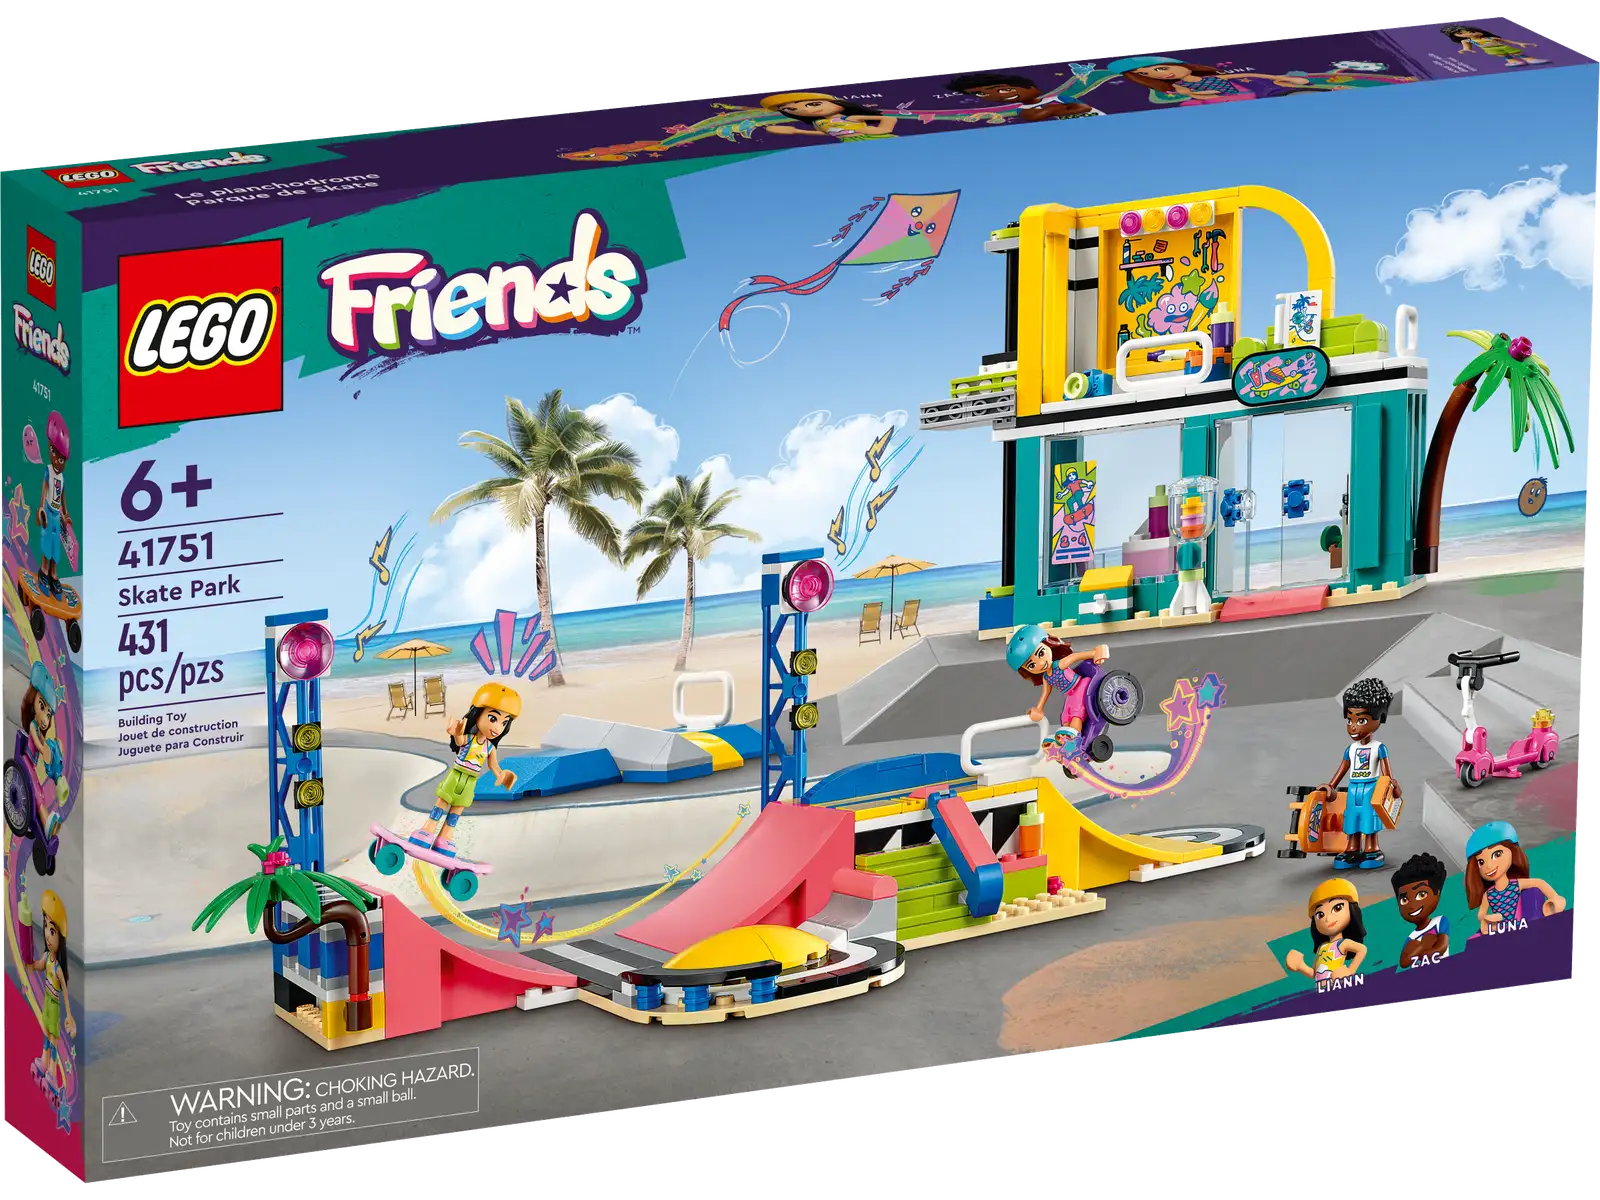 Inspire kids’ creativity and appeal to their sense of adventure with this LEGO® Friends Skate Park (41751) for ages 6 and up. They’ll love meeting the characters and seeing the different ways each one challenges themself at the skate park. Kids can use the ramps and rails to make the characters perform cool tricks. Then they can continue the story with a visit to the park building where there’s a workshop for fixing wheels. There’s an elevator to take the characters to the chill-out area where they can relax. This cool toy is ideal for showing kids how the power of friendship can give you the confidence to try new things. Meet the LEGO Builder app Give your youngster an easy and intuitive building adventure with the LEGO Builder app. Here they can zoom in and rotate models in 3D, save sets and track their progress. Welcome to the next generation of Heartlake City Kids can make friends, discover exciting locations and act out real-life adventures in the LEGO Friends universe. Toy skateboard park for kids aged 6+ – Give kids who love skate parks and outdoor play a fun project as they build and play with this LEGO® Friends Skate Park (41751) 3 mini-dolls and accessories – The set comes with LEGO® Friends characters Liann, Zac and Luna, ramps, rails, in-line skates, a skateboard, scooter, Luna’s wheelchair and helmets for each character Explore the park building – After enjoying a session on the ramps and rails, kids can explore the park building with its elevator, workshop and relaxation area Accessories to encourage creative storytelling – Comes with ramps, rails, in-line skates, a skateboard, scooter and a gumball machine A gift for kids who love skateboarding – This LEGO® Friends toy set makes a fun birthday, holiday or any-other-day gift for kids aged 6 and up who would love to build a Skate Park Dimensions – The skate ramp measures over 4.5 in. (11 cm) high, 12.5 in. (32 cm) wide and 6 in. (16 cm) deep A helping hand – Discover intuitive building instructions in the LEGO® Builder app, where kids can zoom in and rotate models in 3D, track progress and save sets as they develop new skills A new generation of Heartlake City – In January 2023, the LEGO® Friends universe expanded to introduce new characters and new locations to inspire more role-play adventures A quality product – All LEGO® components meet strict industry standards to ensure they are consistent, compatible and easy to build with: it’s been that way since 1958 Safety first – LEGO® Friends bricks and pieces are dropped, heated, crushed, twisted and analyzed to make sure they meet stringent global safety standards